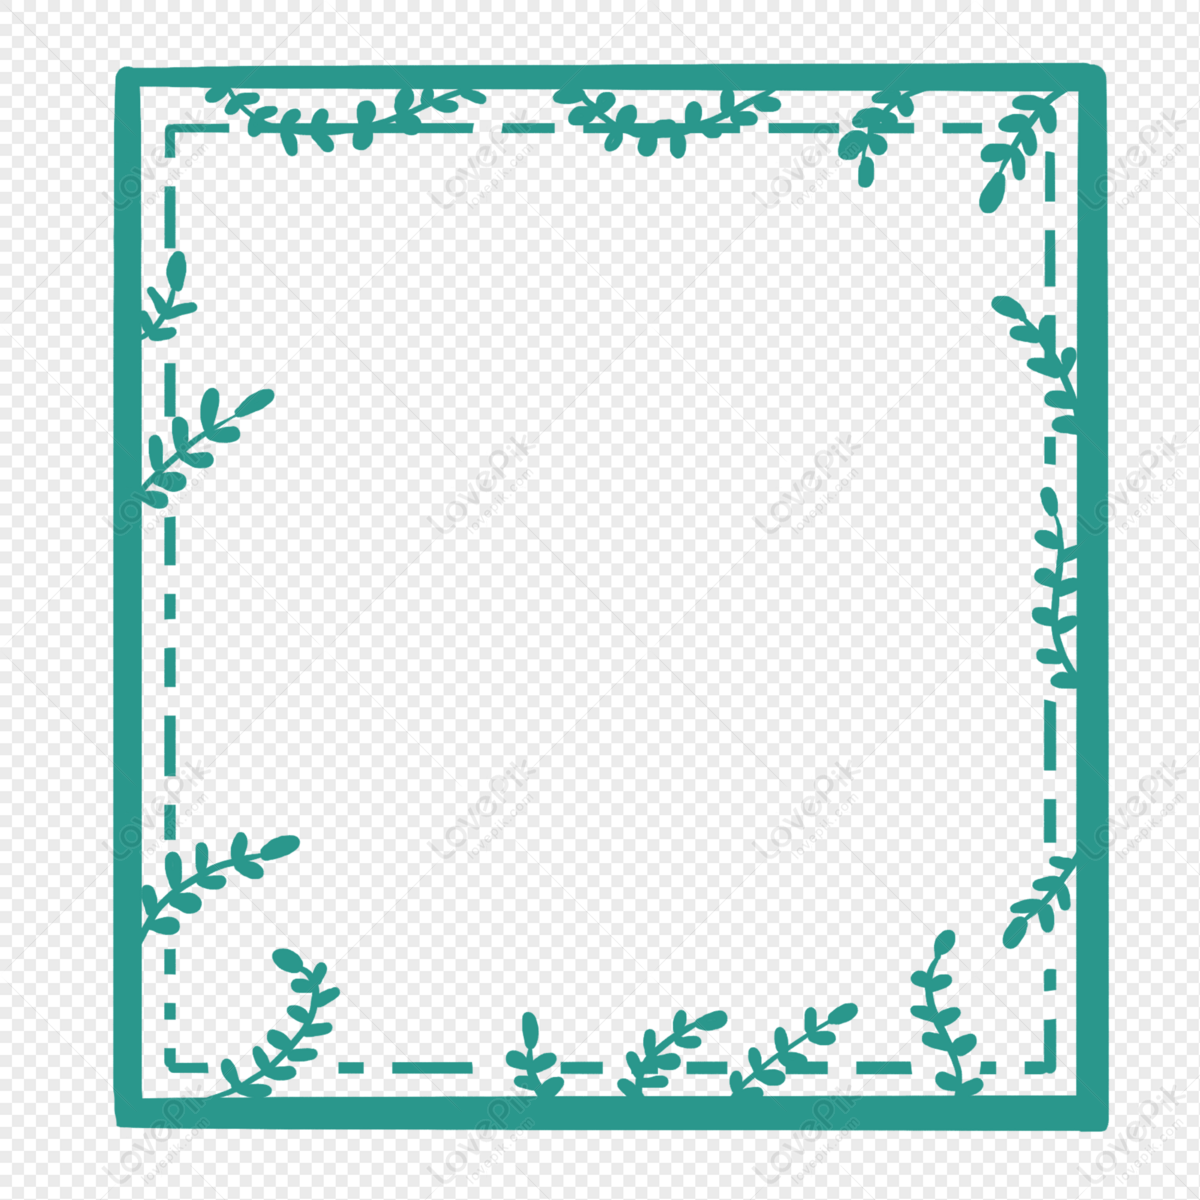 Hand Drawn Summer Fresh Plant Vegetation Border PNG Free Download And ...